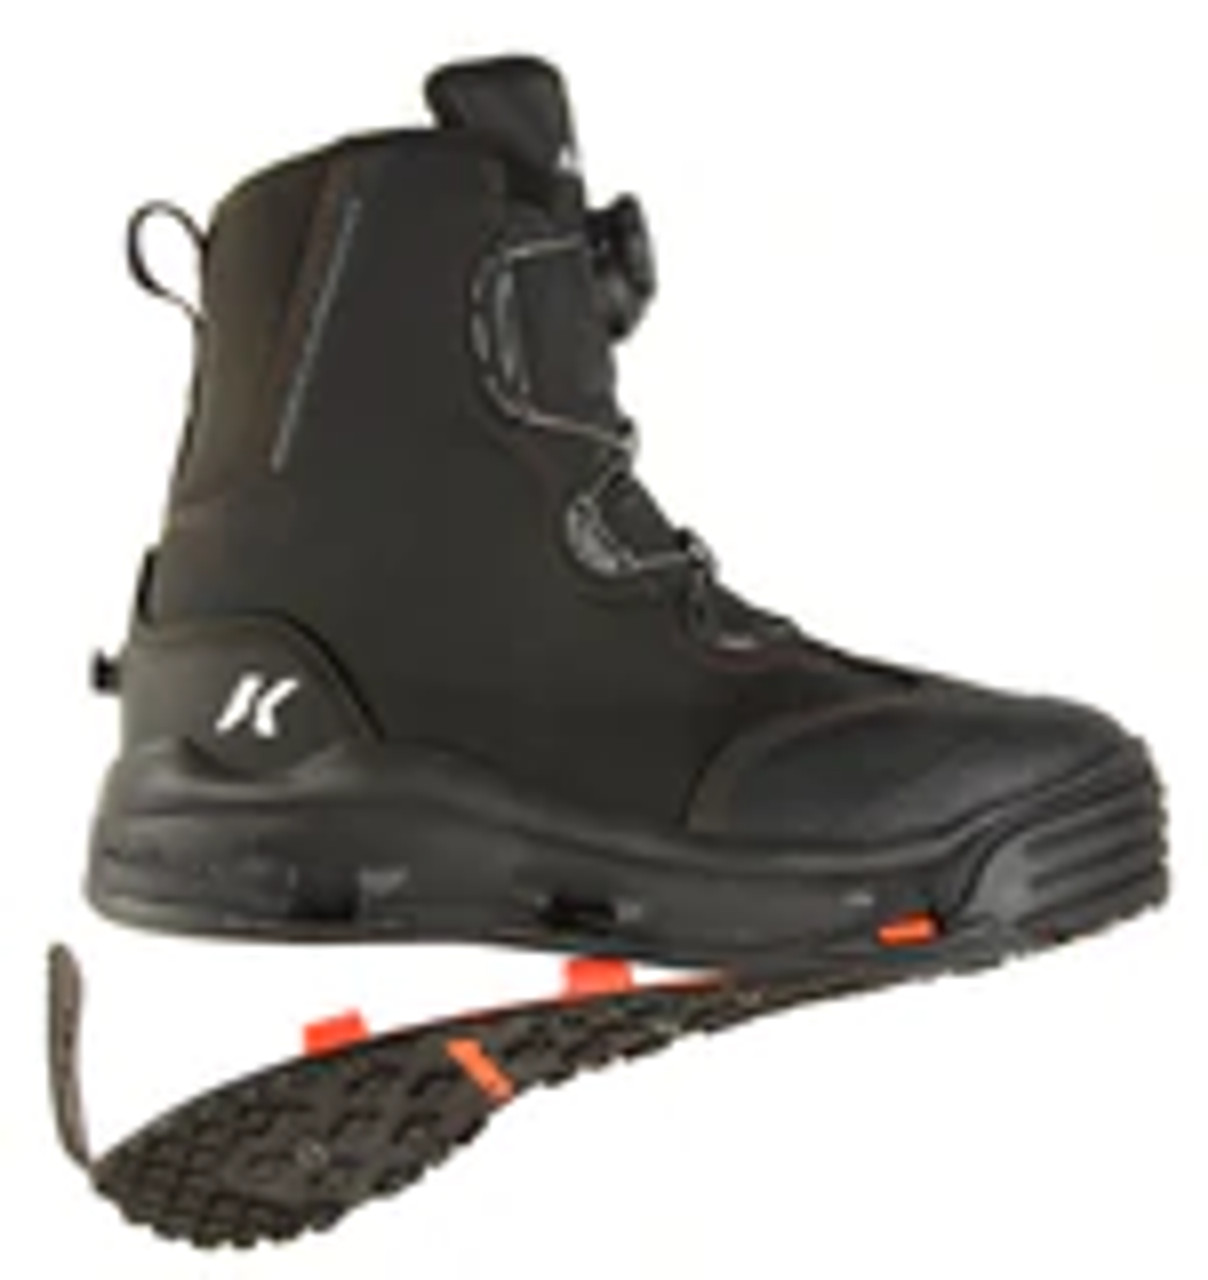 KORKERS DEVIL'S CANYON W/ FELT & KLING-ON SOLES WADING BOOTS